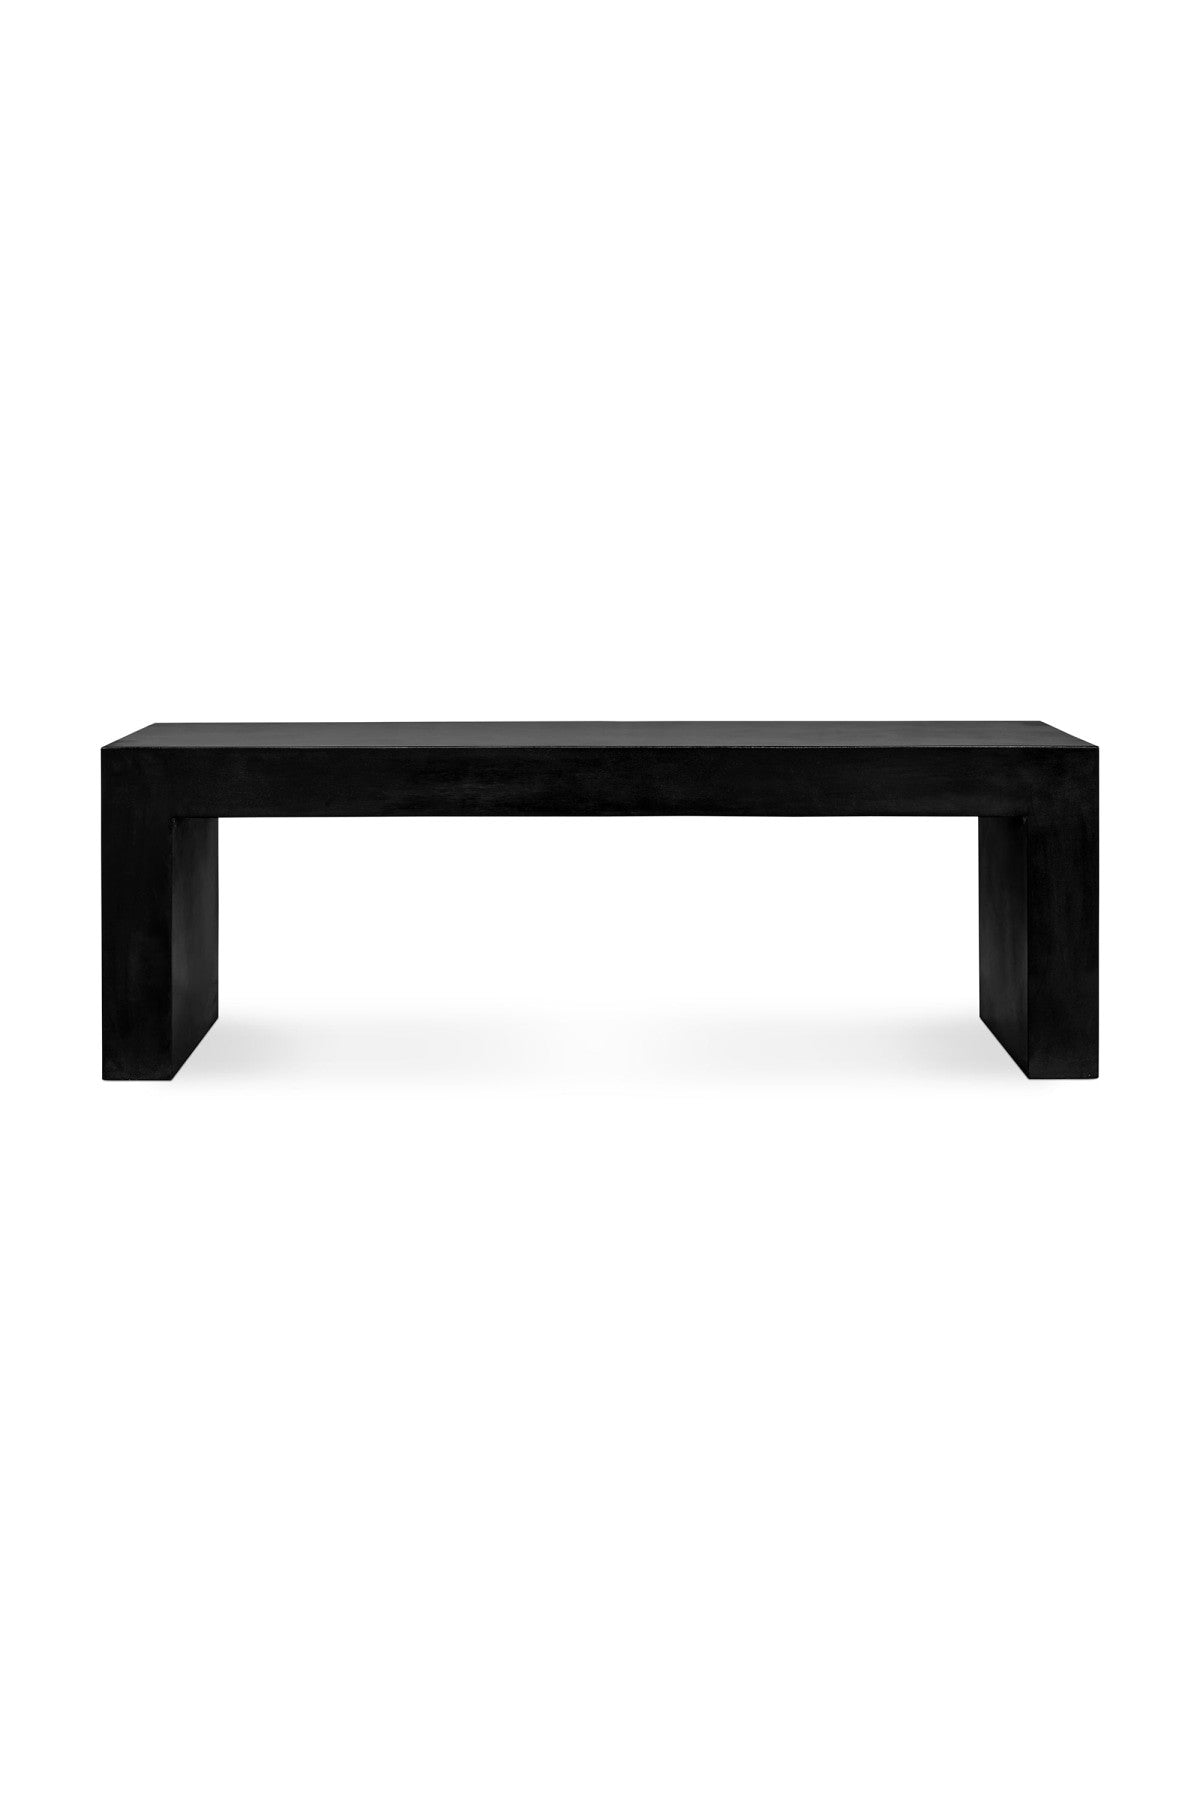 Daltina Outdoor Dining Bench - 3 Finishes